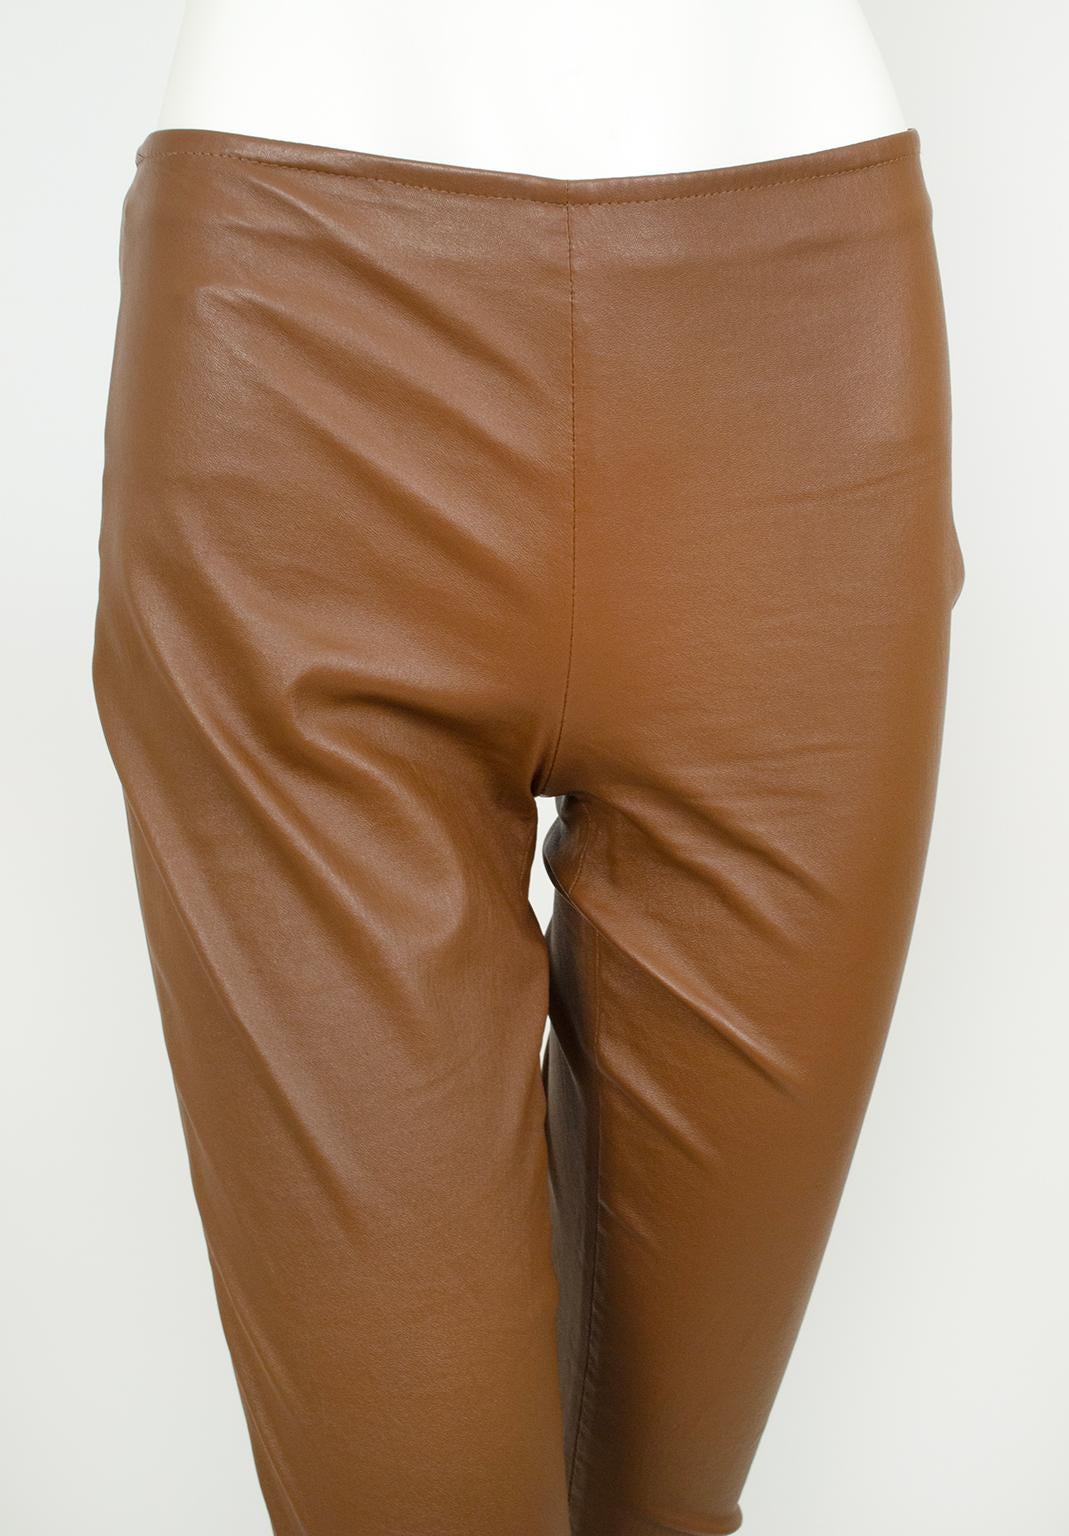 New The Row Ellerton Brown Leather Ankle Zip Stretch Moto Leggings – XS-S, 2011 For Sale 1